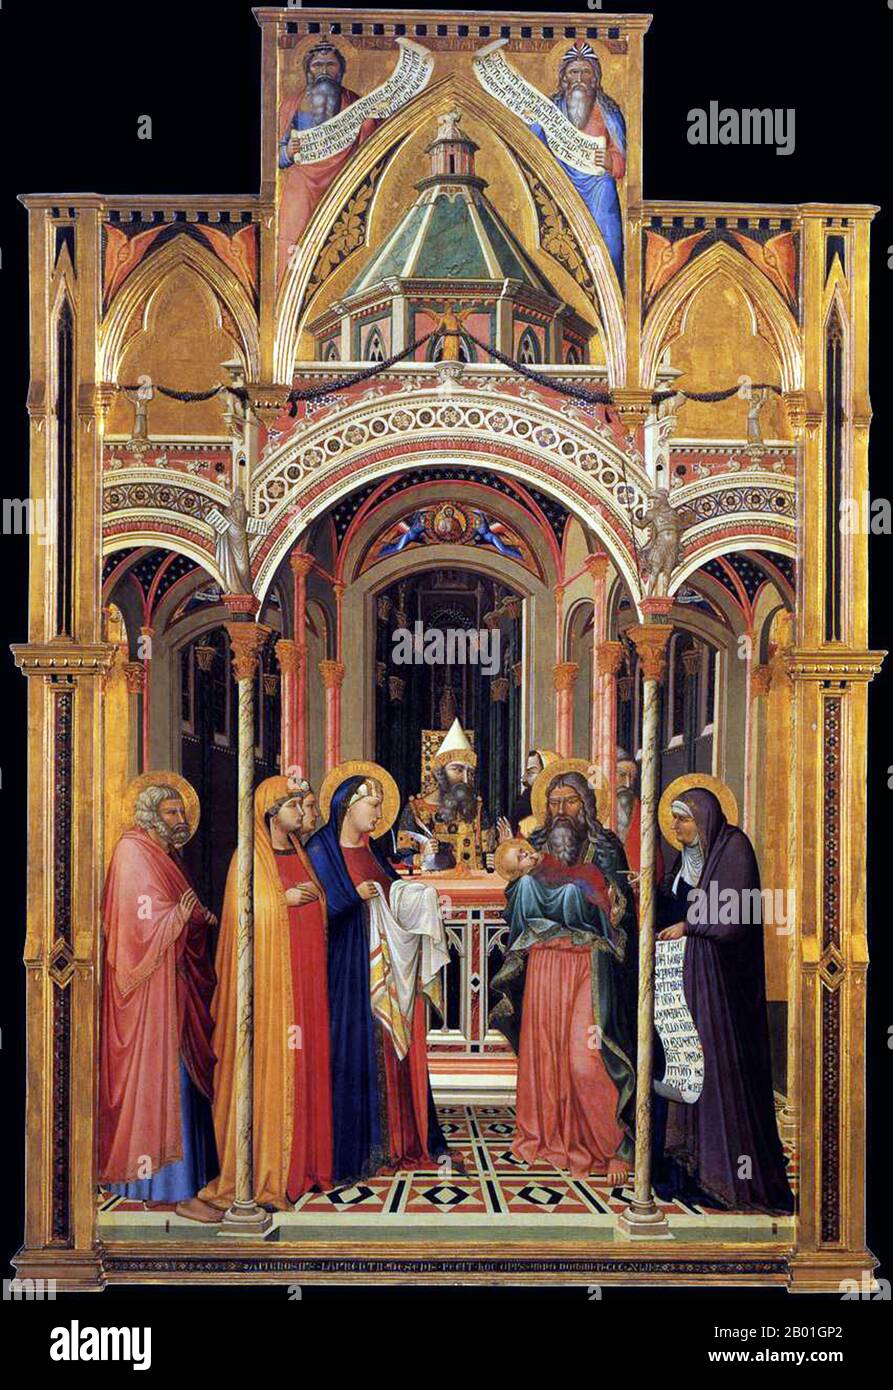 Italy: 'Presentation at the Temple'. Tempera on panel painting by Ambrogio Lorenzetti (1290-1348), Uffizi Gallery, Florence, 1342.  The Presentation of Jesus at the Temple, which falls on 2 February, celebrates an early episode in the life of Jesus. In the Eastern Orthodox Church and some Eastern Catholic Churches, it is one of the twelve Great Feasts, and is sometimes called Hypapante (lit., 'Meeting' in Greek). Other traditional names include Candlemas, the Feast of the Purification of the Virgin, and the Meeting of the Lord. Stock Photo